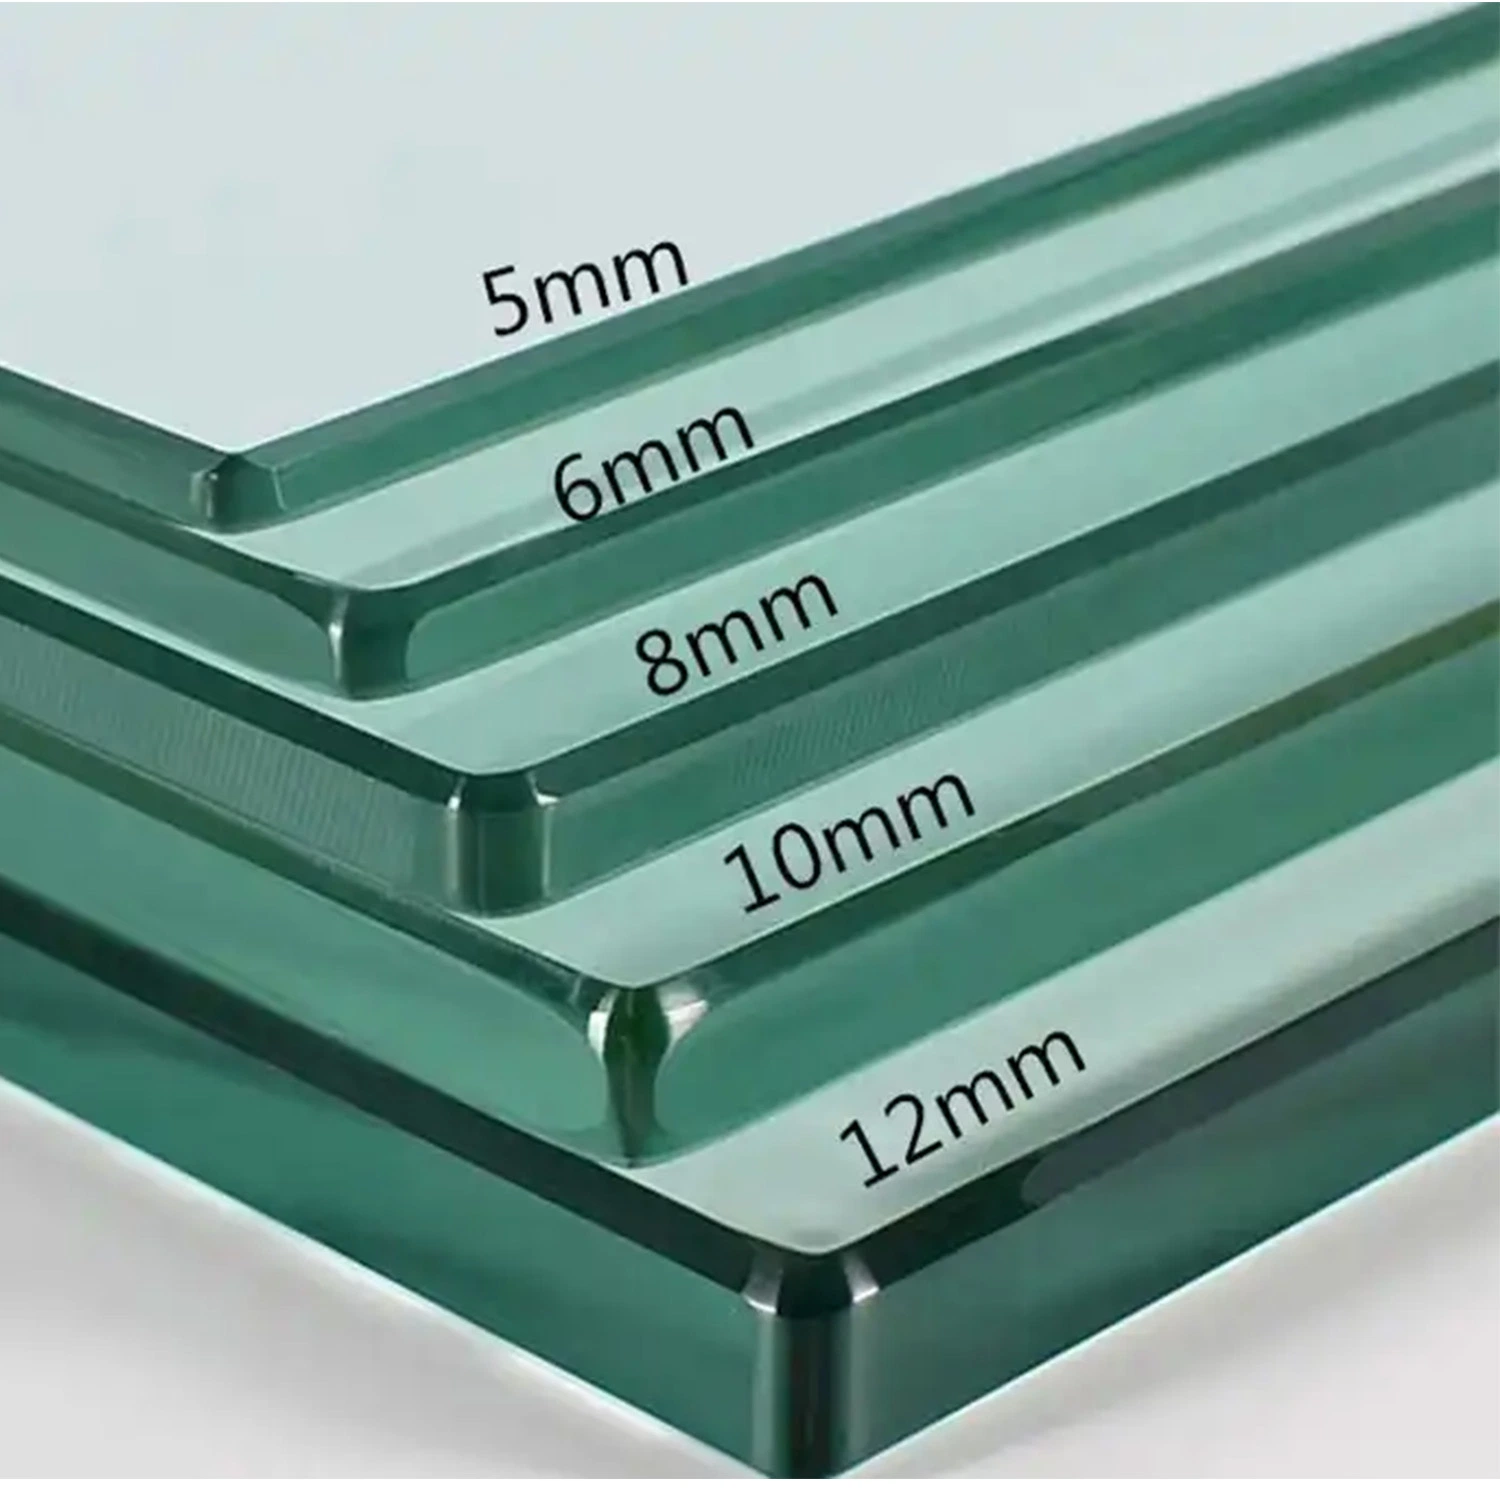 2/3/4/5/6/8/10/12mm Tempered/Laminated/Bend/Low-E/Toughened/Low Iron/Heat Soaked Treated/Flat/Insulate/Curved/Safety/Colored/Tinted/Reflective/Pattern Glass